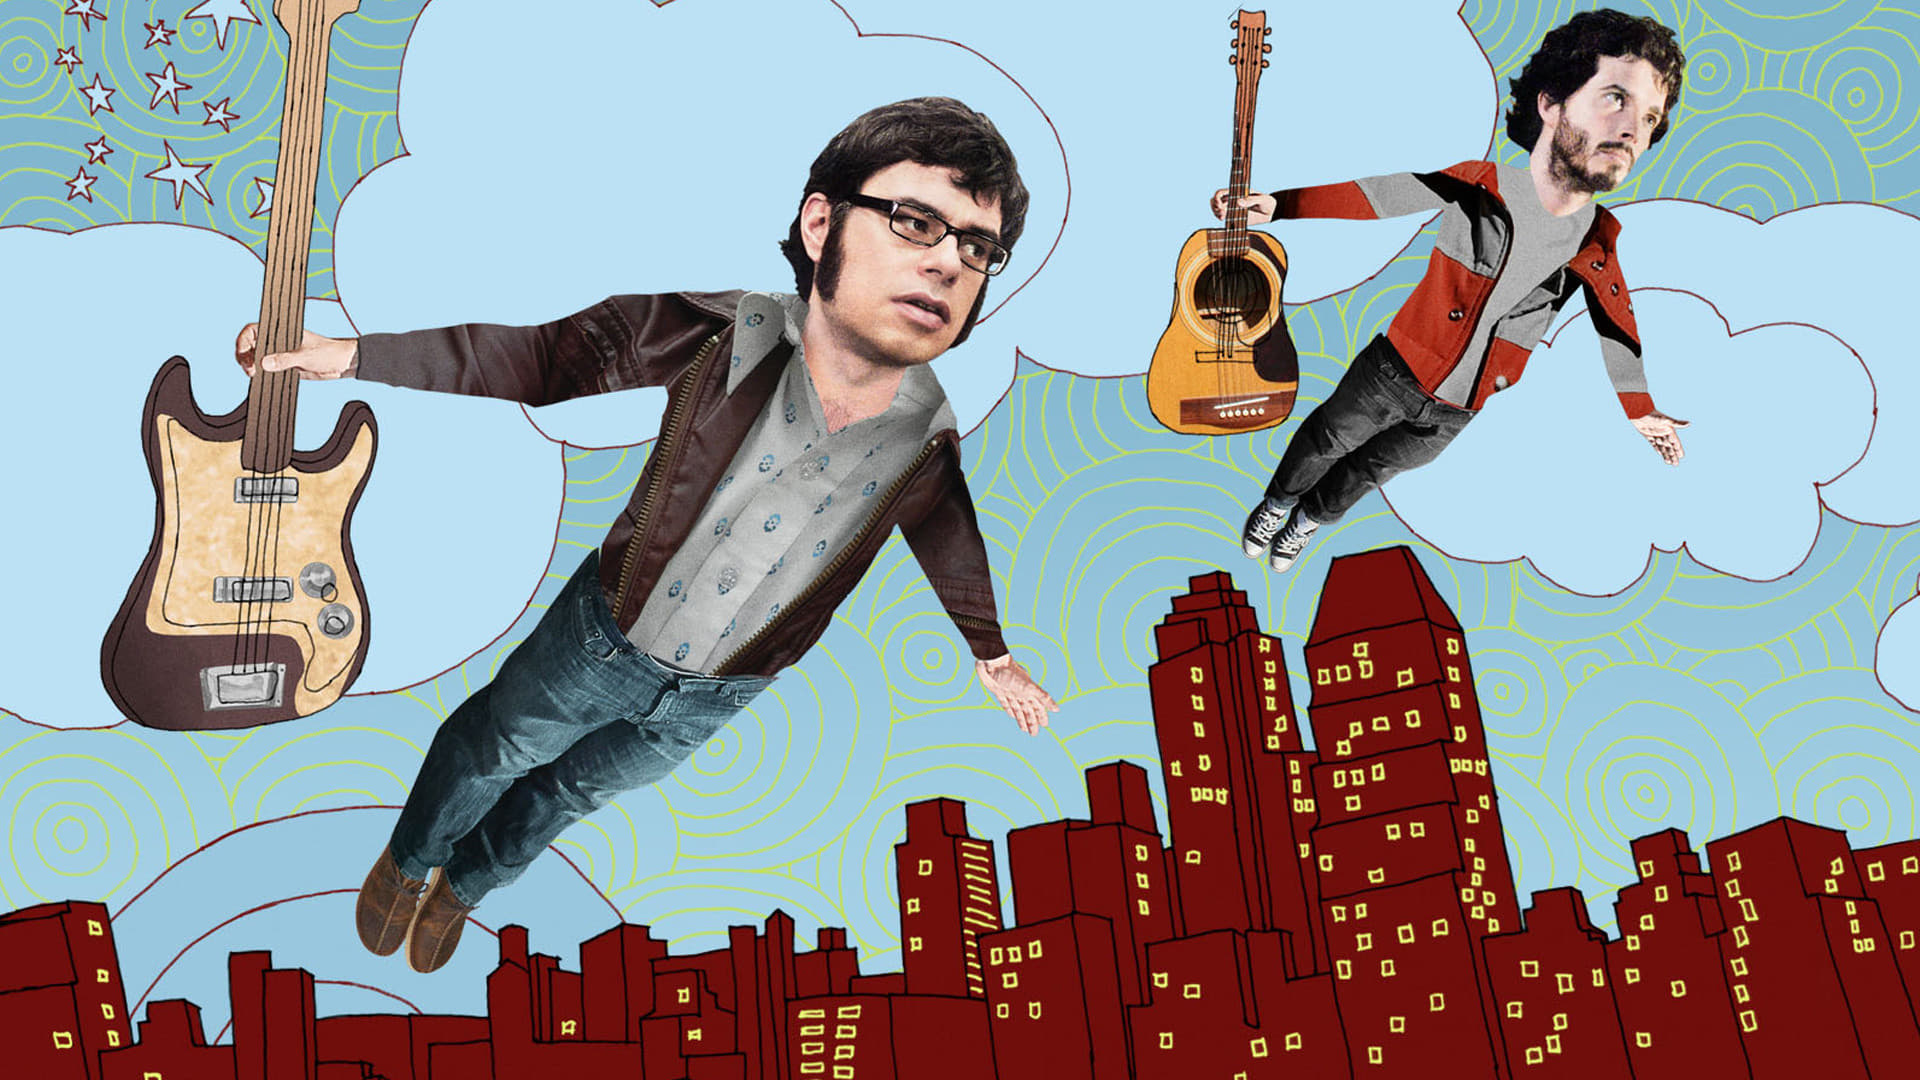 Backdrop Image for Flight of the Conchords